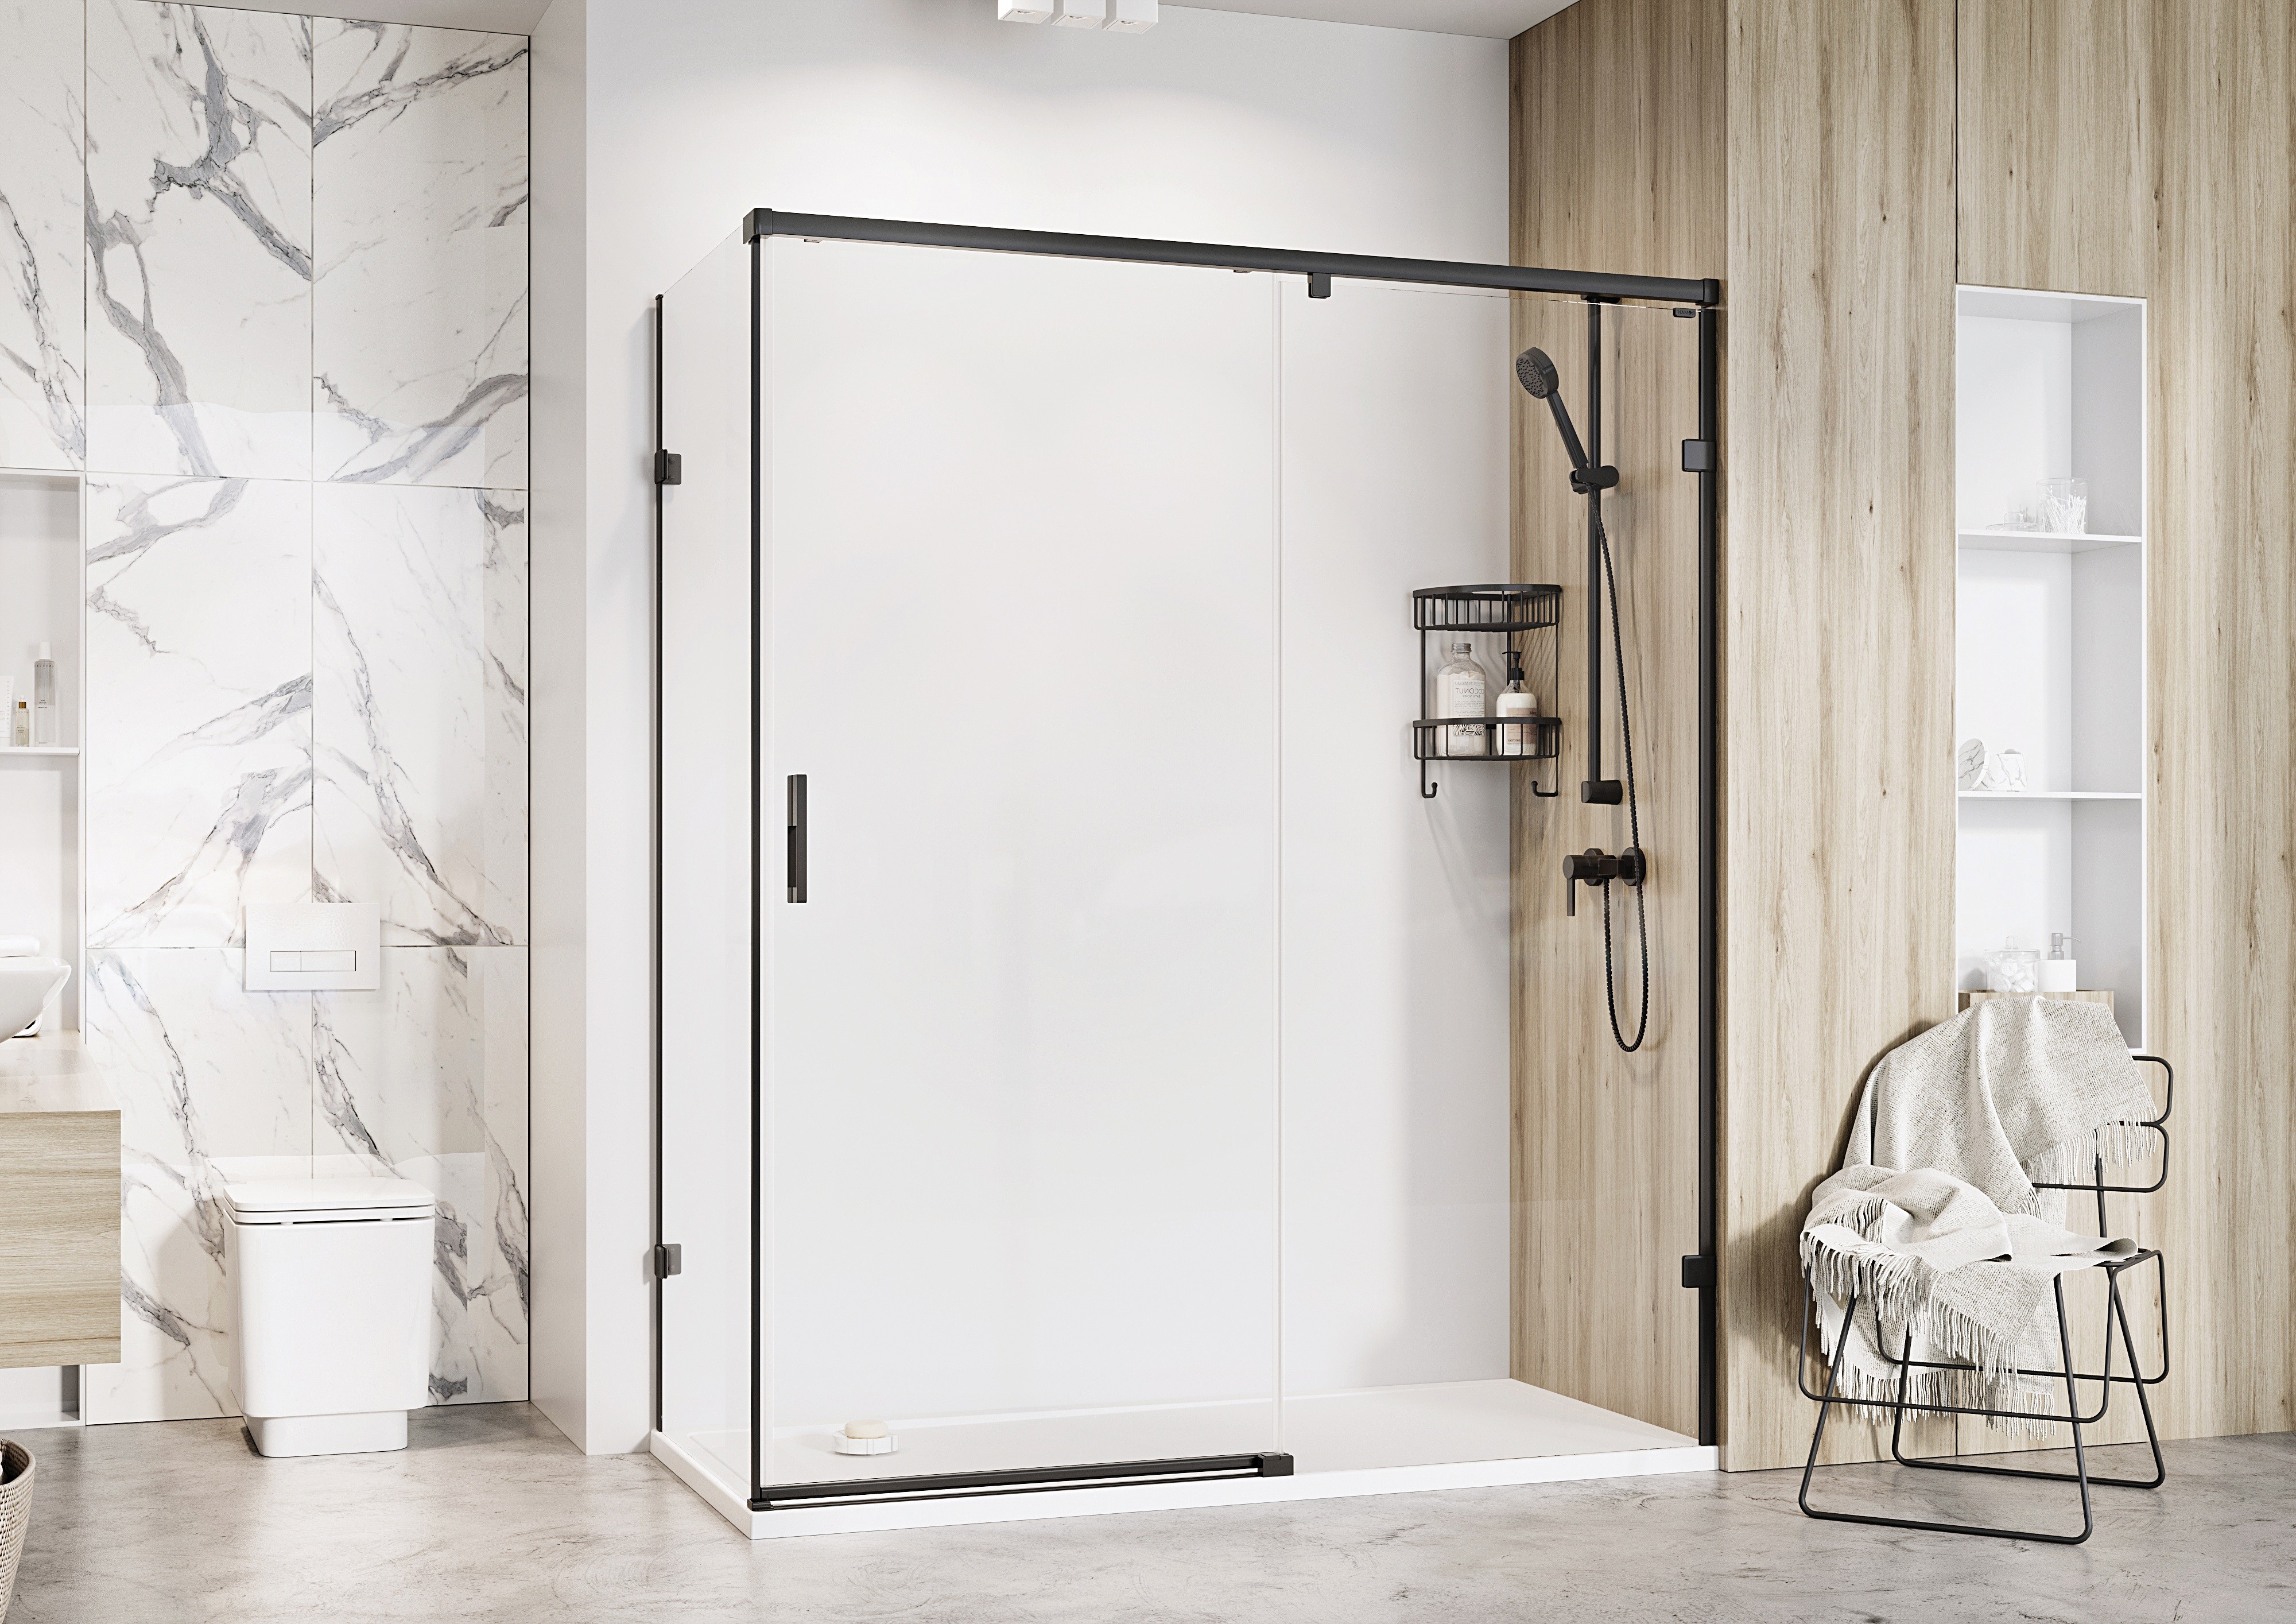 Roman Liberty 8 Sliding One Door for 1500mm Corner Fitting - Left Hand Brushed Brass [KT1D15LCBR] [DOOR SYSTEM ONLY SIDE PANEL NOT INCLUDED]